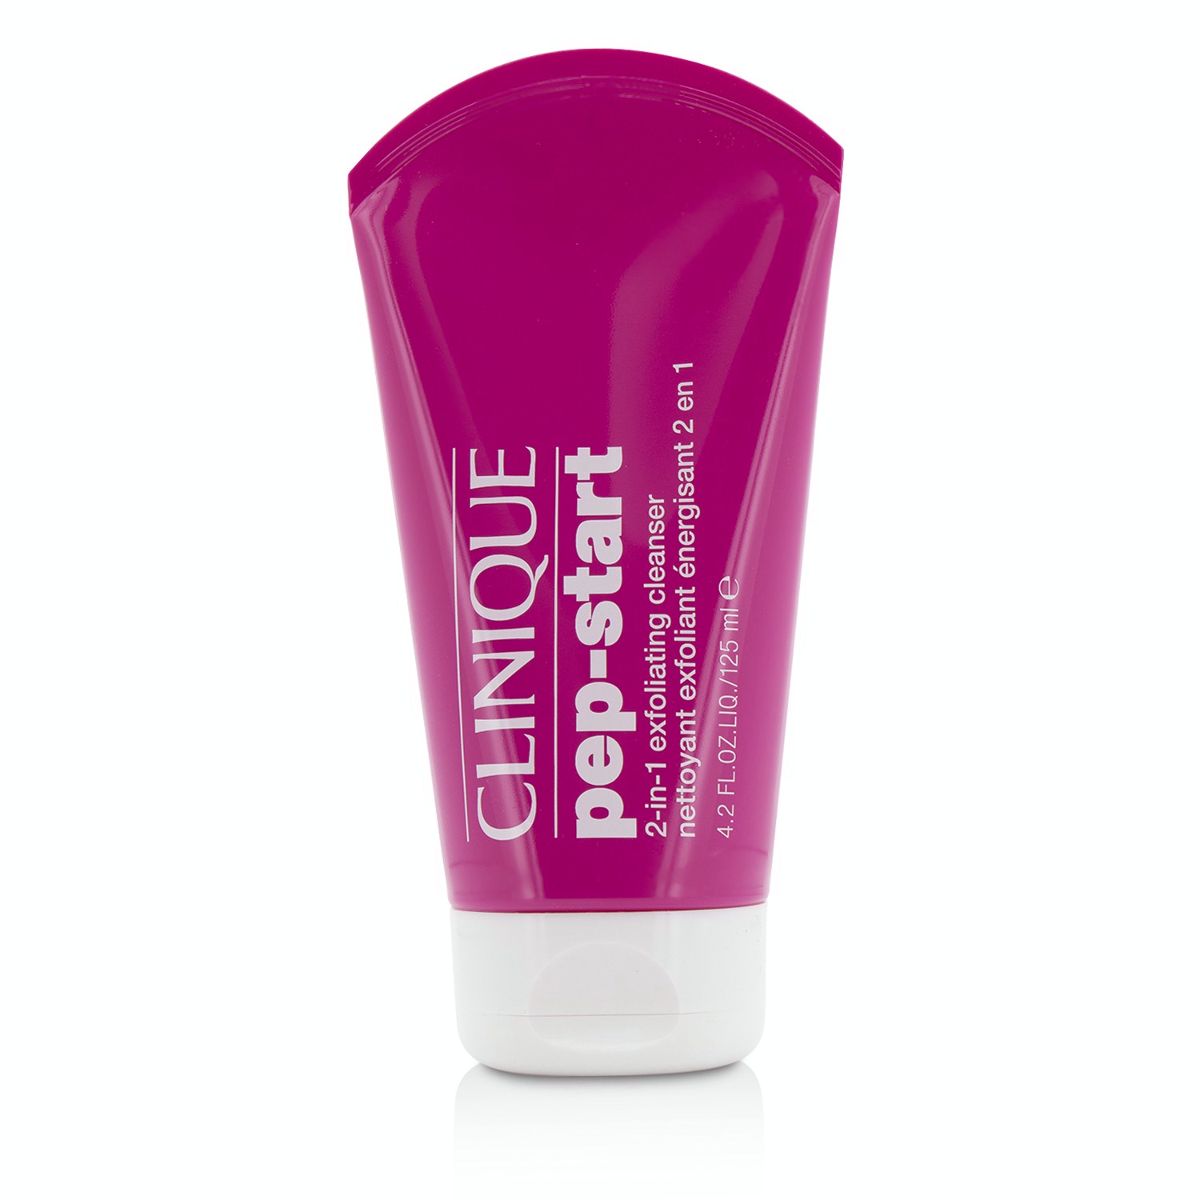 Pep-Start 2-In-1 Exfoliating Cleanser Clinique Image